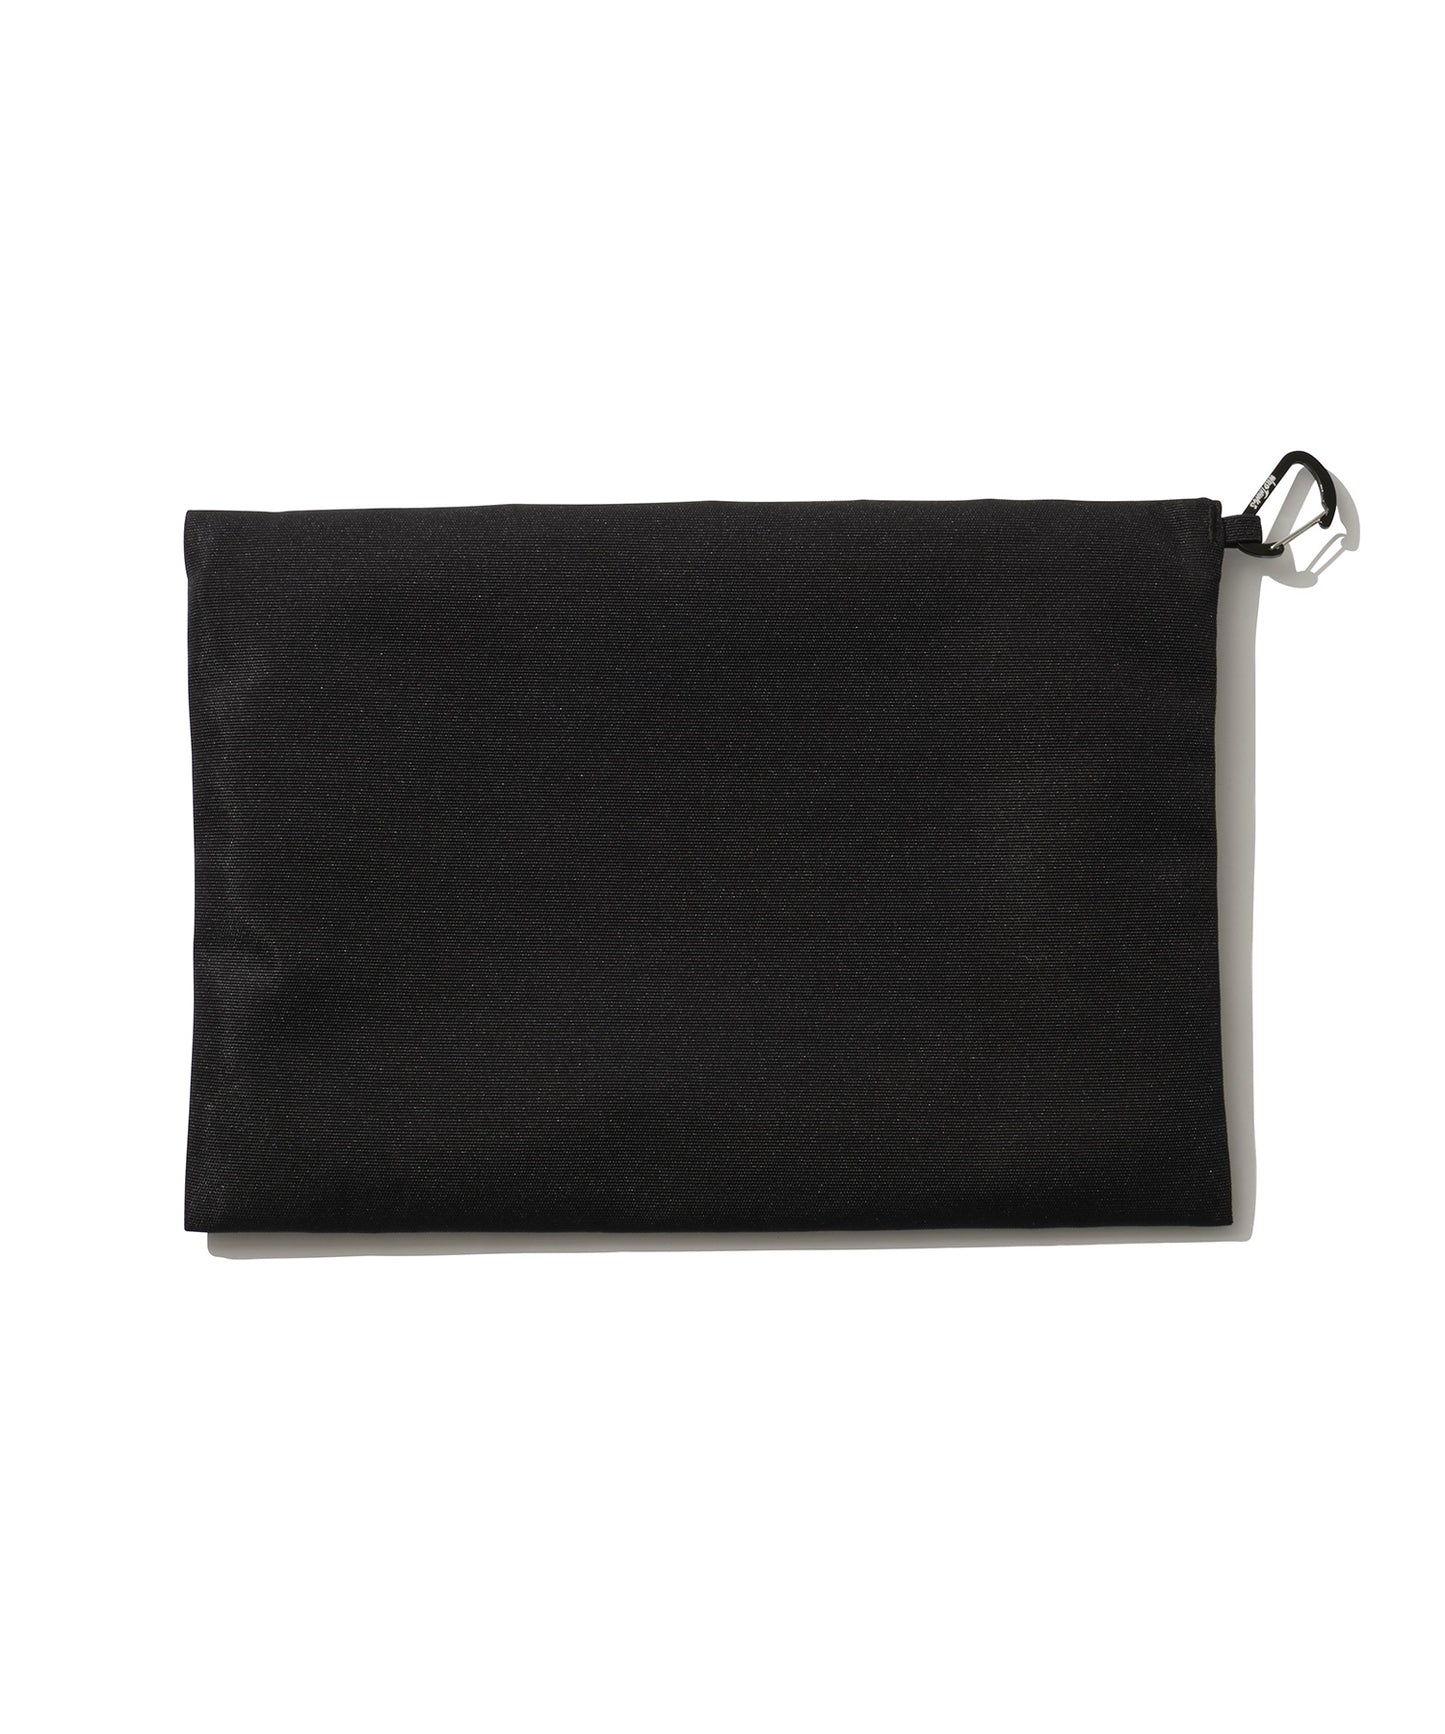 [WILD THINGS ワイルドシングス] THE PX MULTI POUCH A4｜マルチポーチ(A4)＜BLACK＞